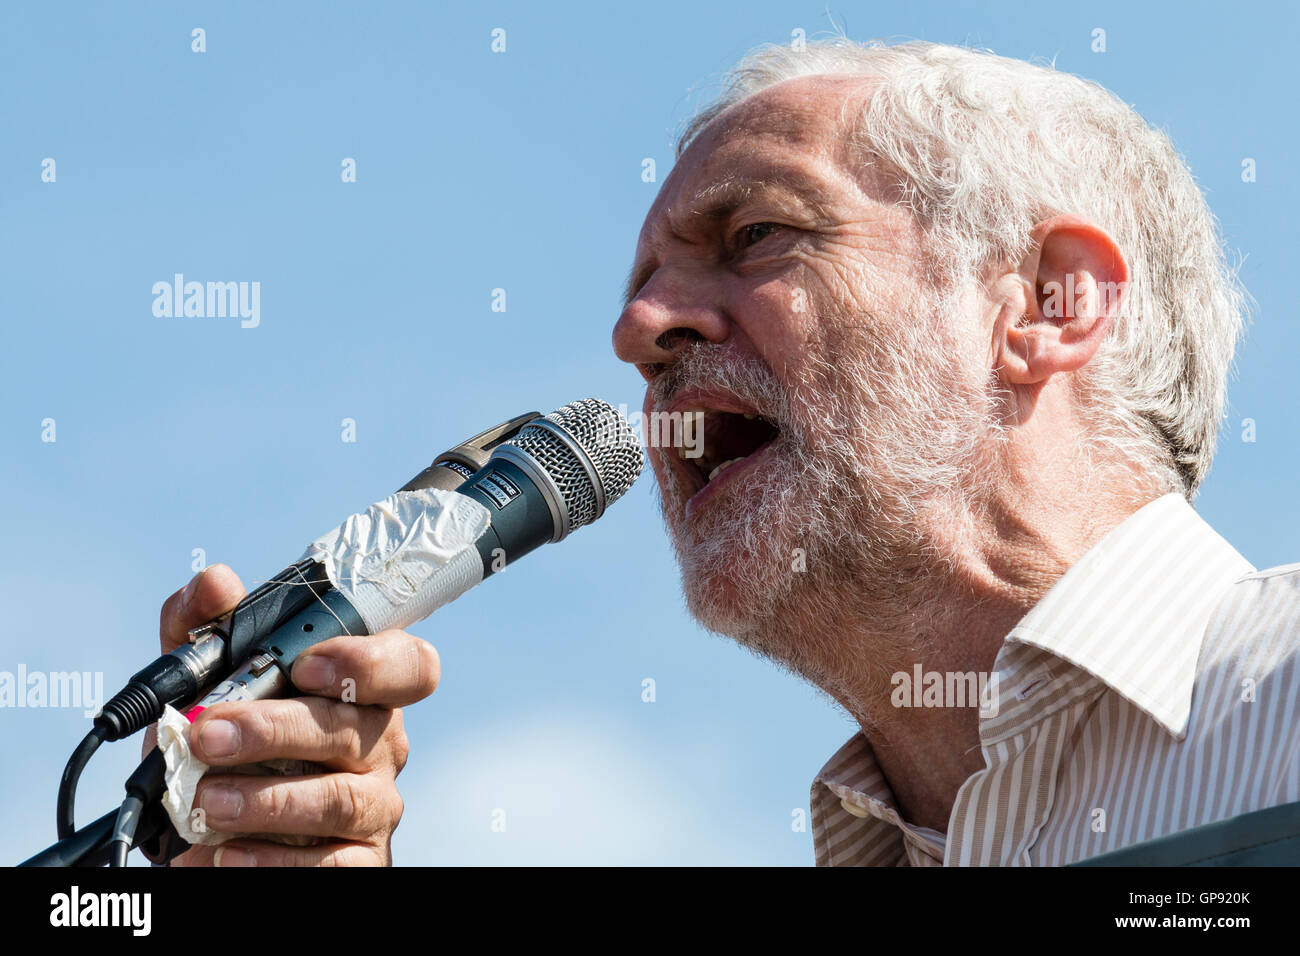 Jeremy Corbyn, UK opposition leader and head of the labour party, addressing a rally at Ramsgate. Low angle view close up of face as he speaks into a microphone. Stock Photo